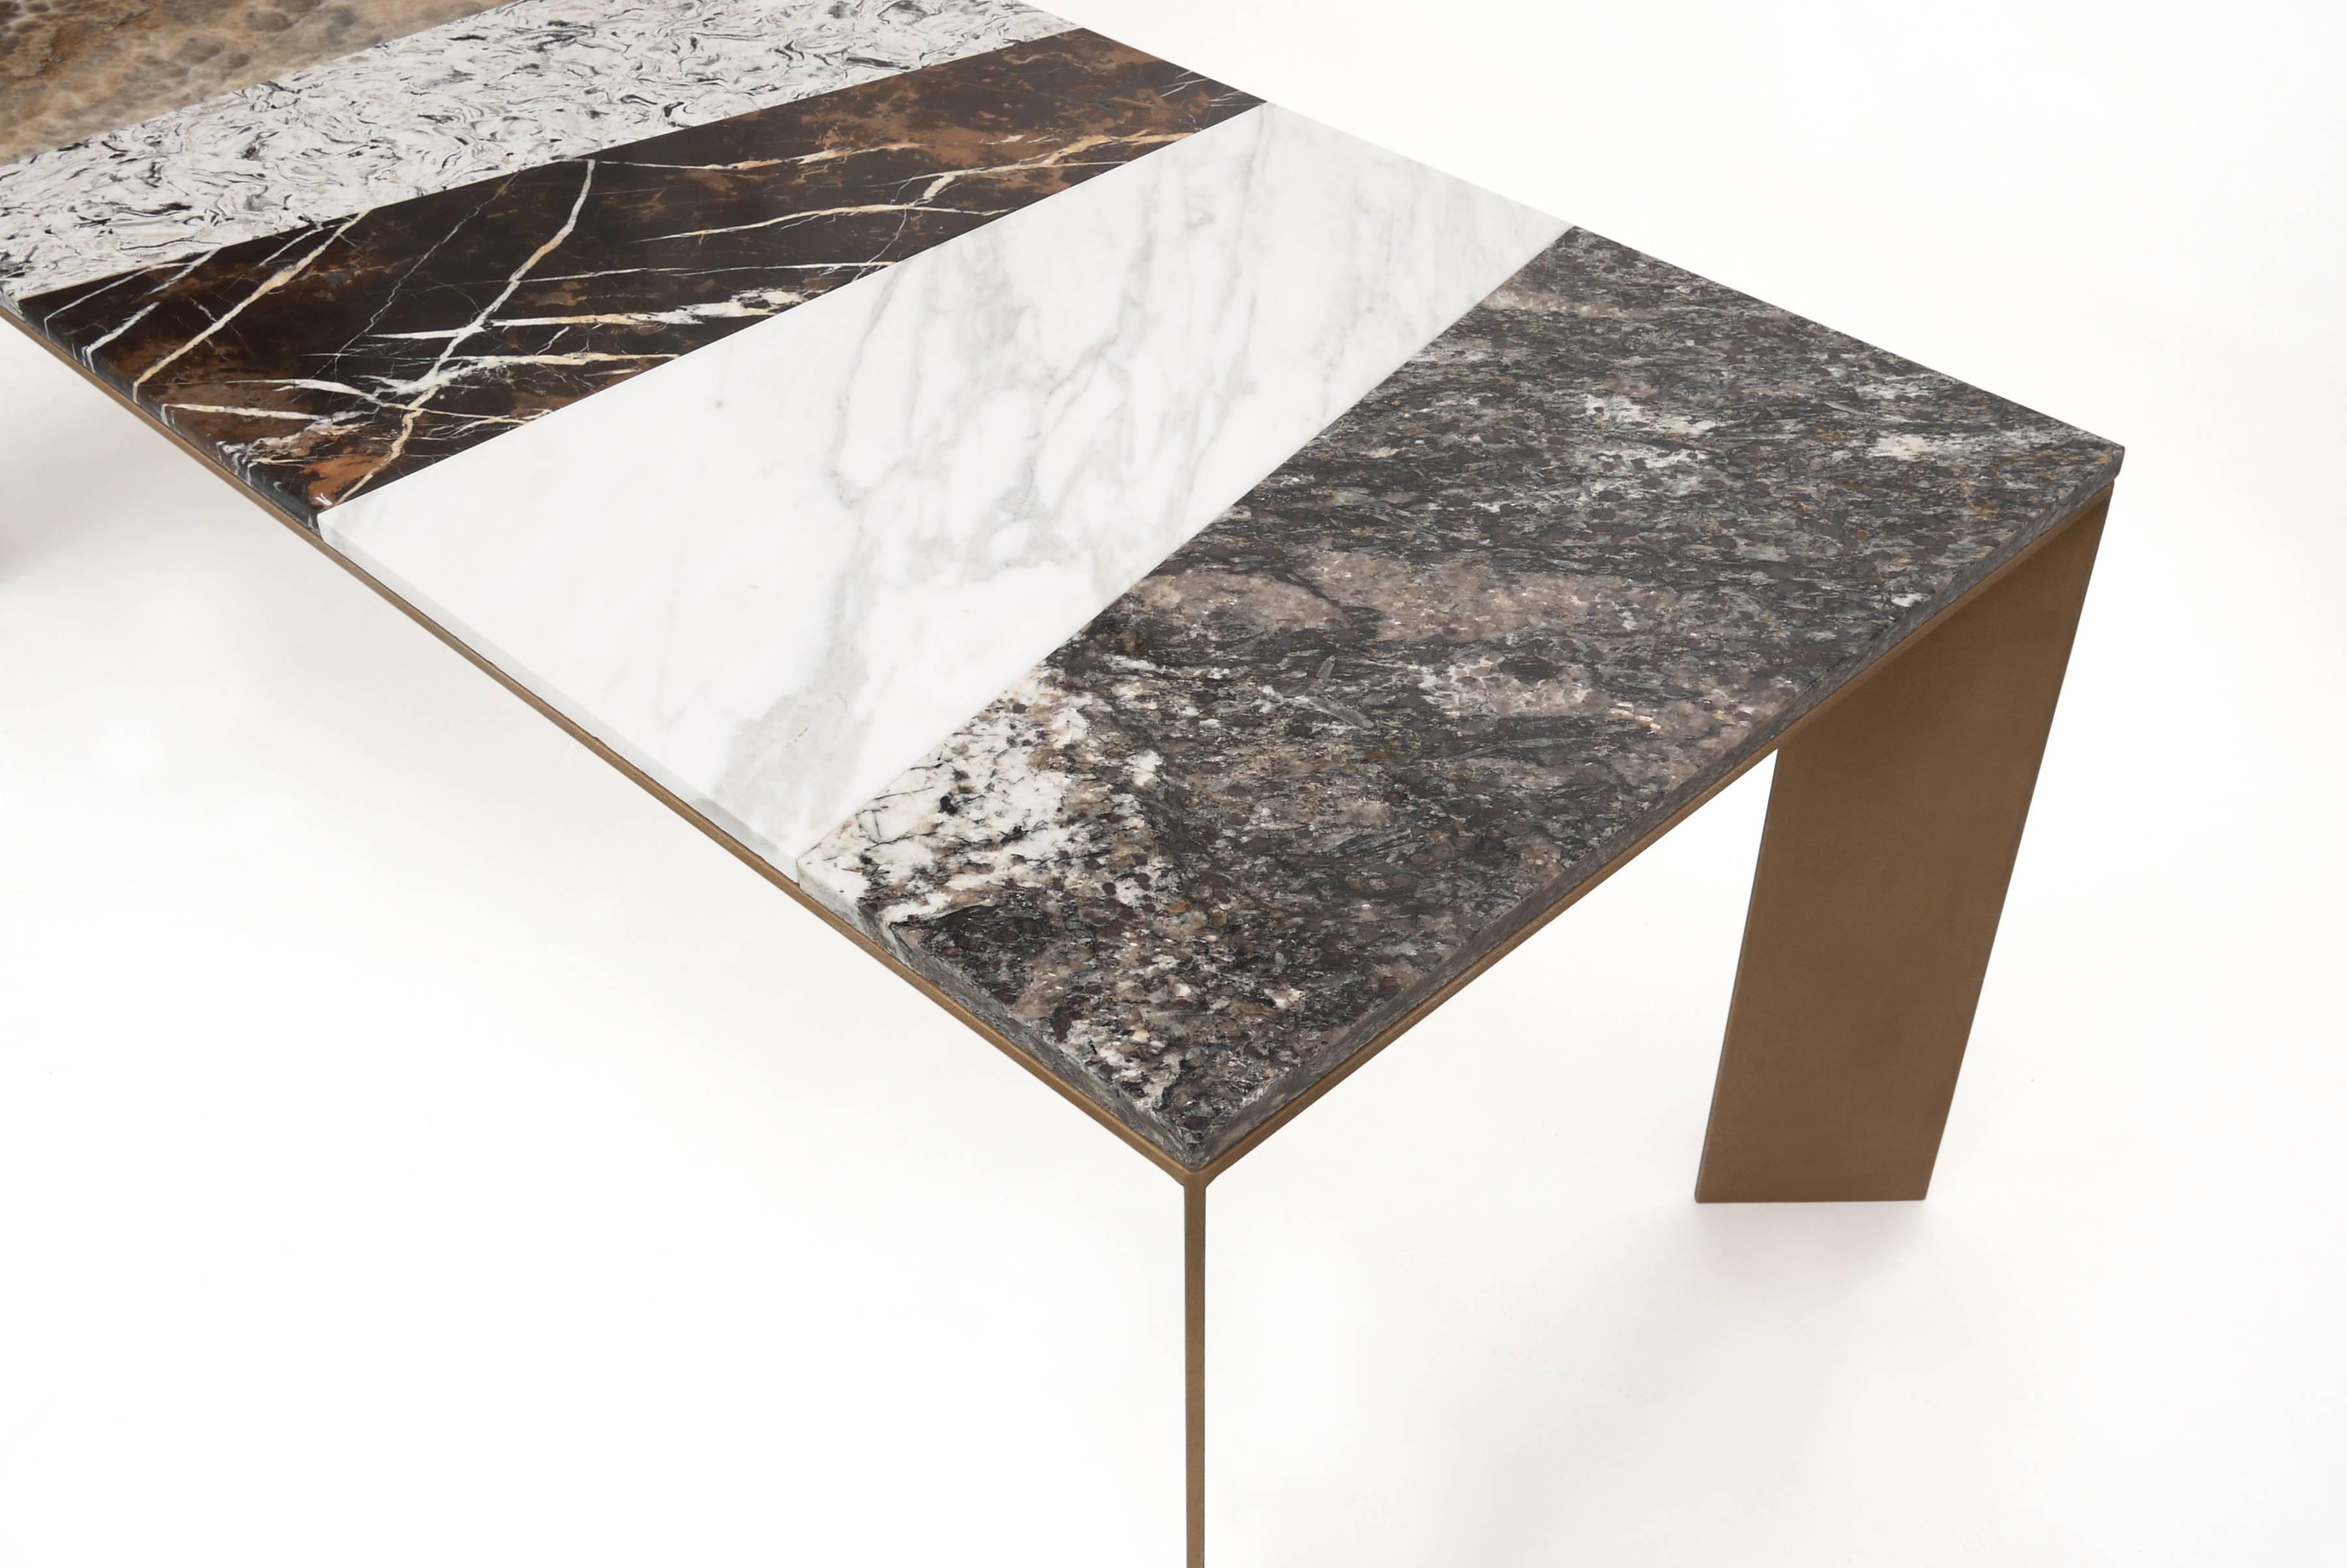 Dining table rendered in a mixture of reclaimed marble, quartz and granite on a textured bronze-coated aluminium base. Available in a range of sprayed metallic coatings including bronze, copper and zinc. 

Suitable for outdoor applications.